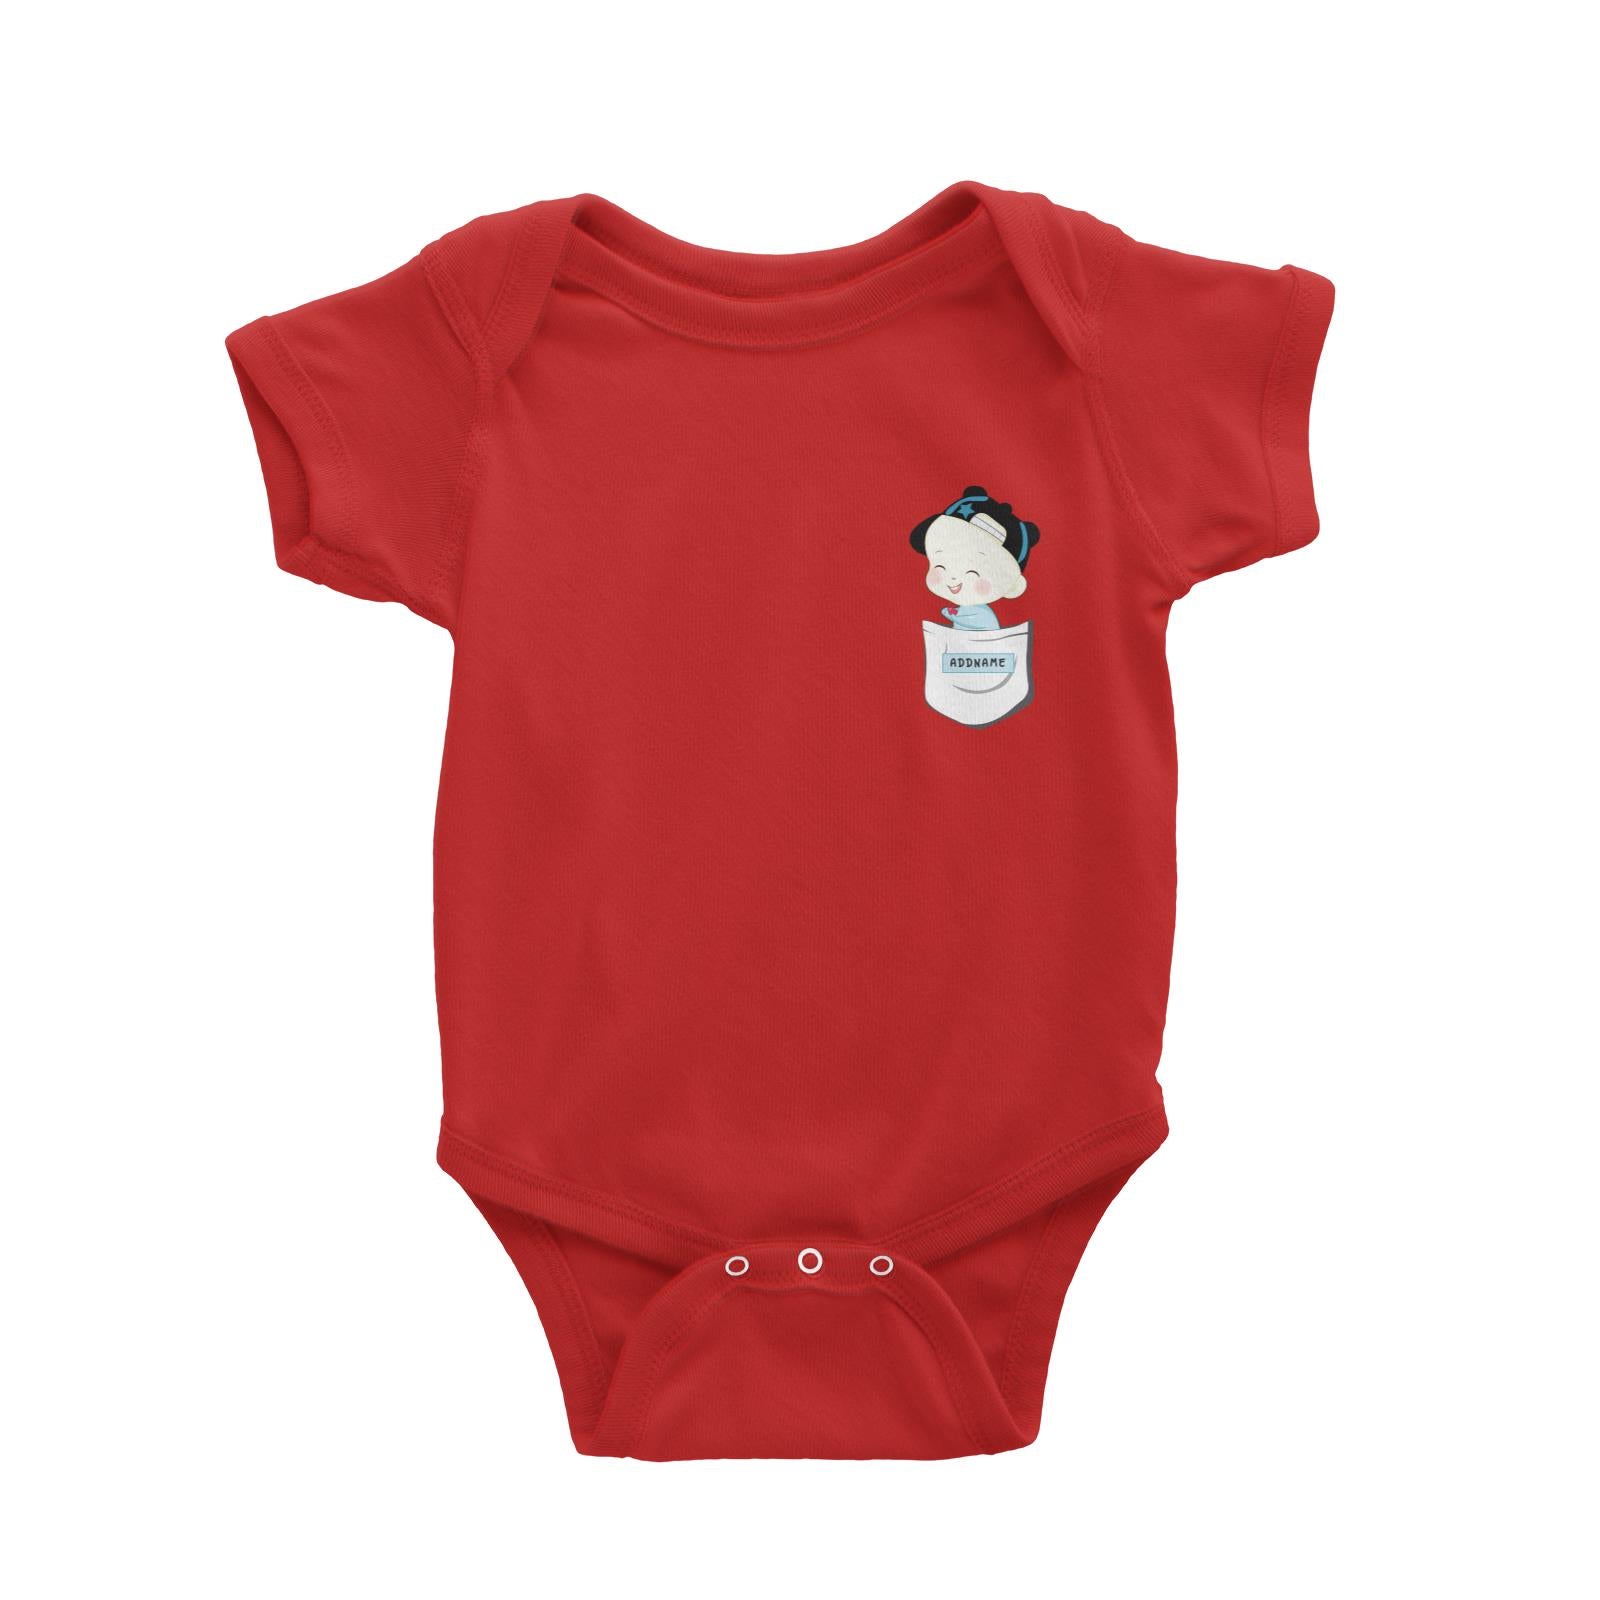 My Lovely Family Series Pocket Size Baby Boy Addname Baby Romper